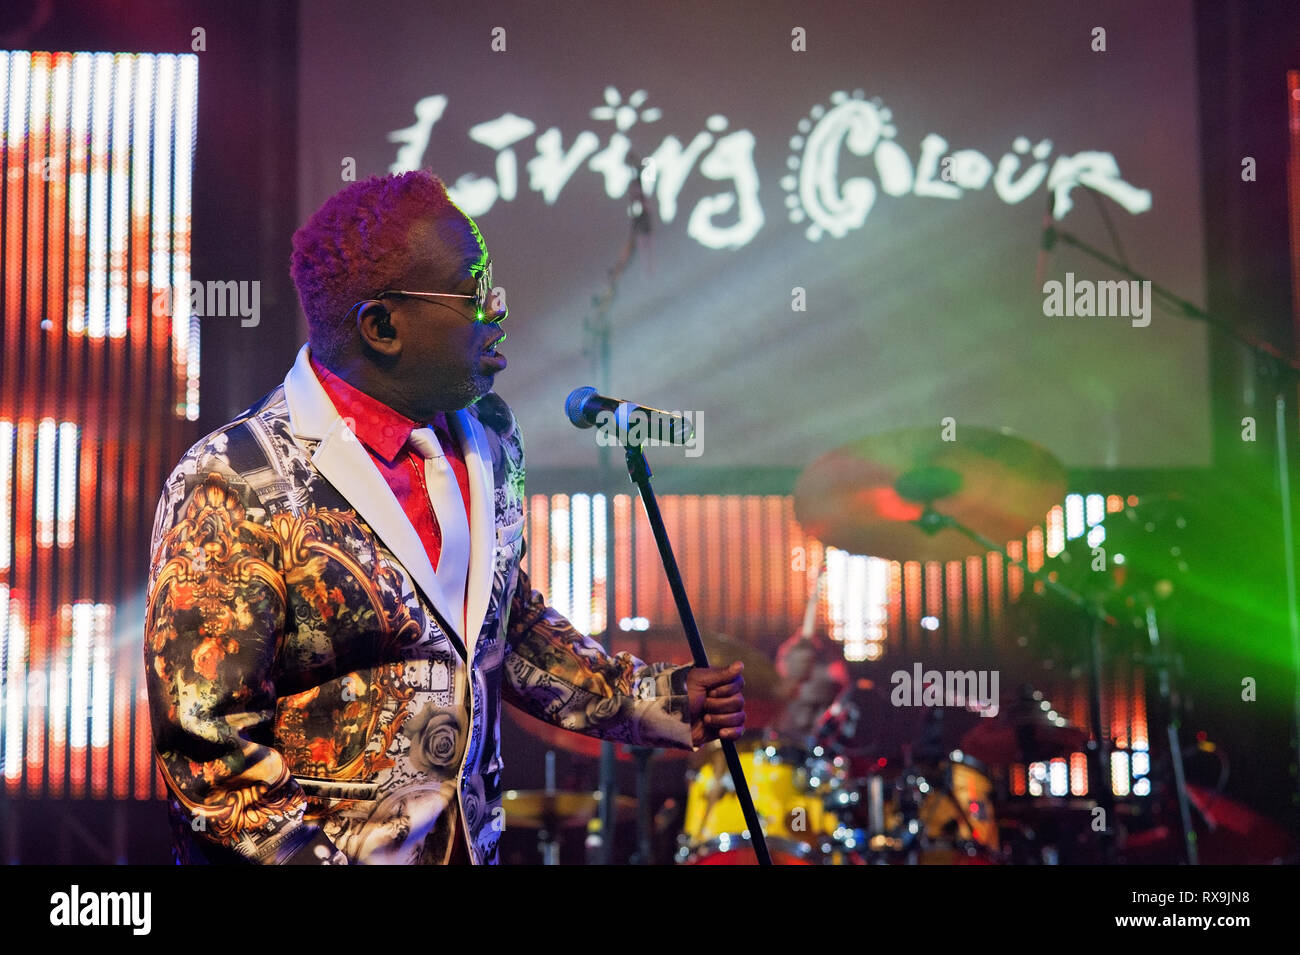 Corey Glover, vocalist for the band, 'Living Colour' performing for a show held at the Culture Room in Ft. Lauderdale, Florida on October 27, 2017. Stock Photo